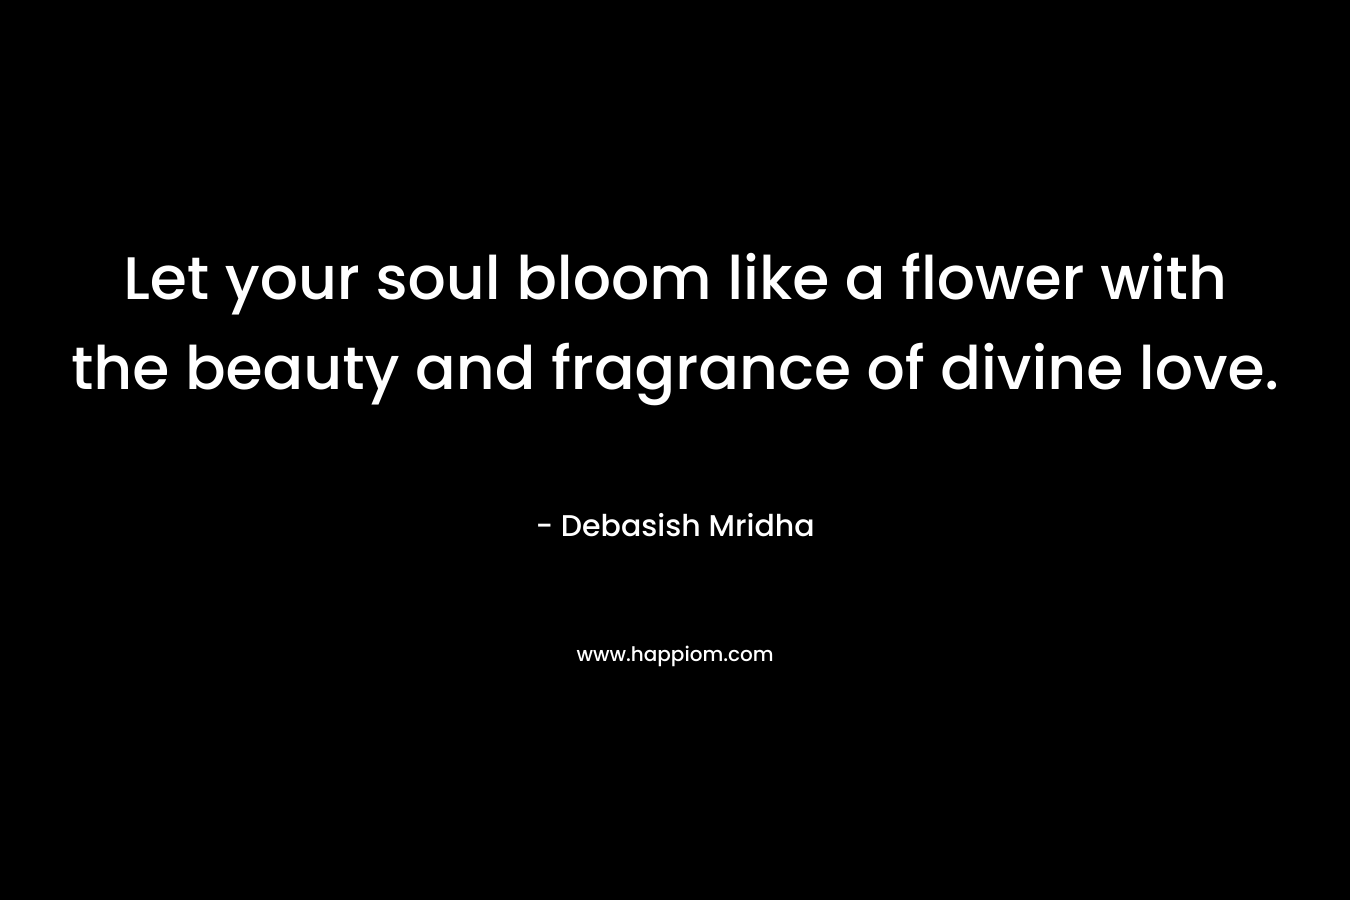 Let your soul bloom like a flower with the beauty and fragrance of divine love.